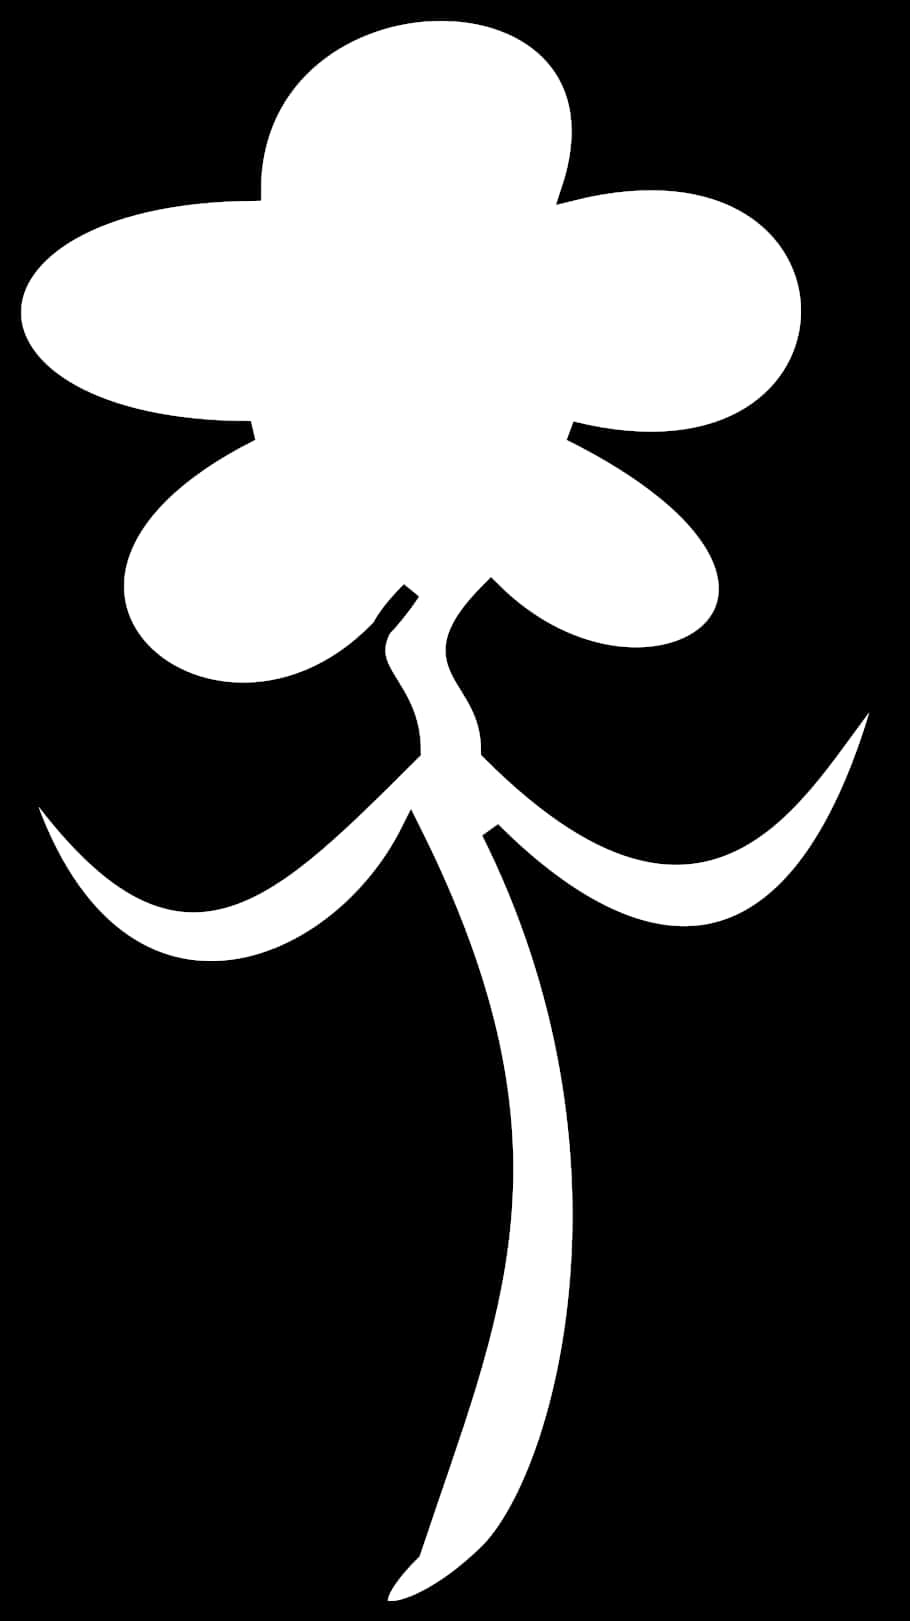 Abstract Flower Blackand White Graphic PNG image